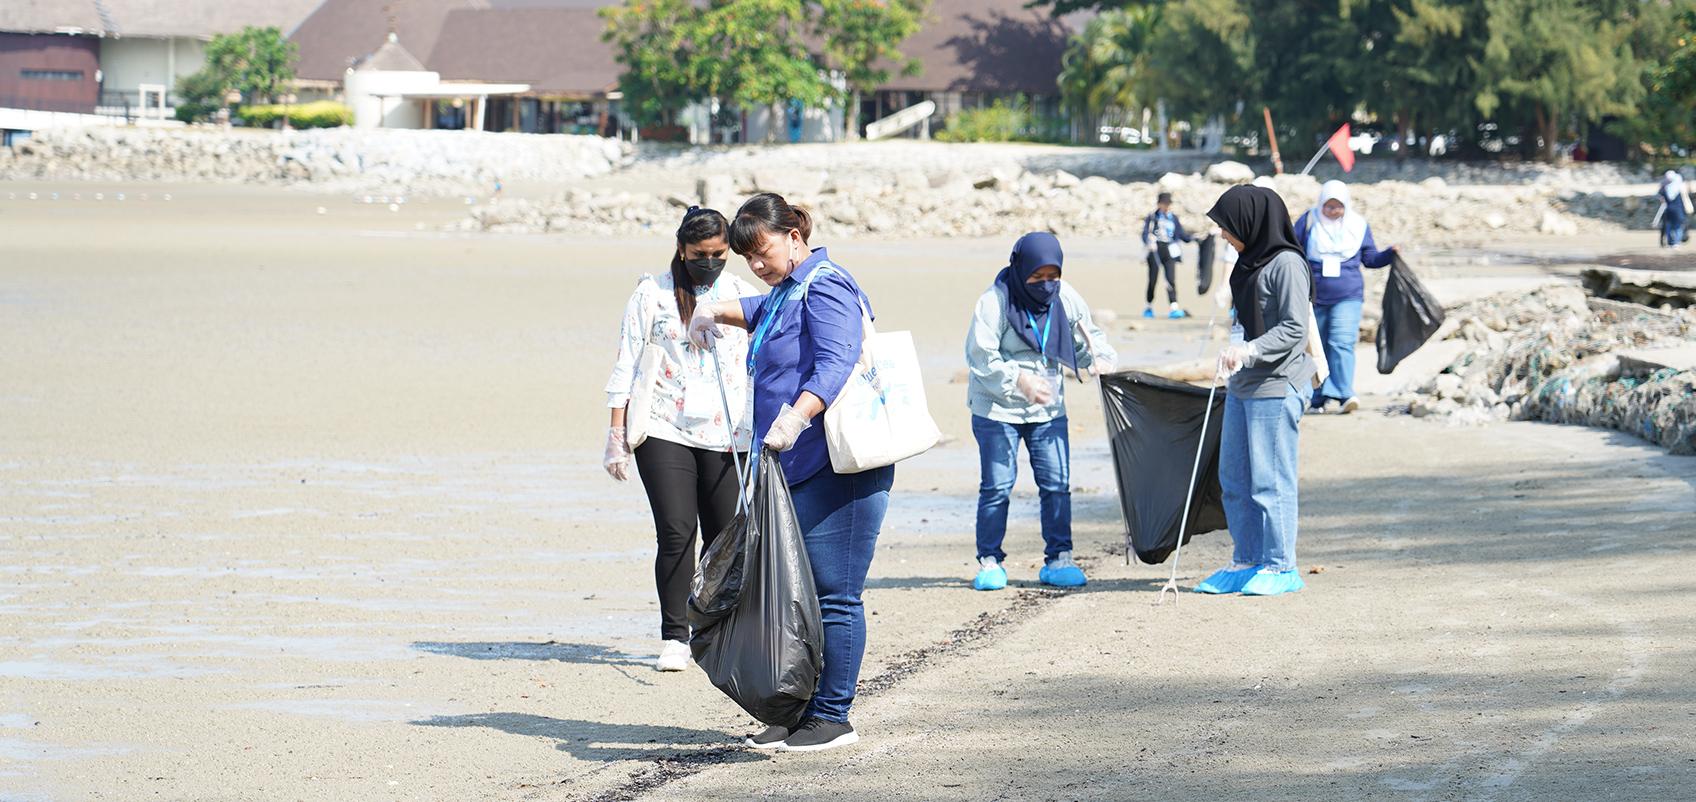 Employees are cleaning up on the beach